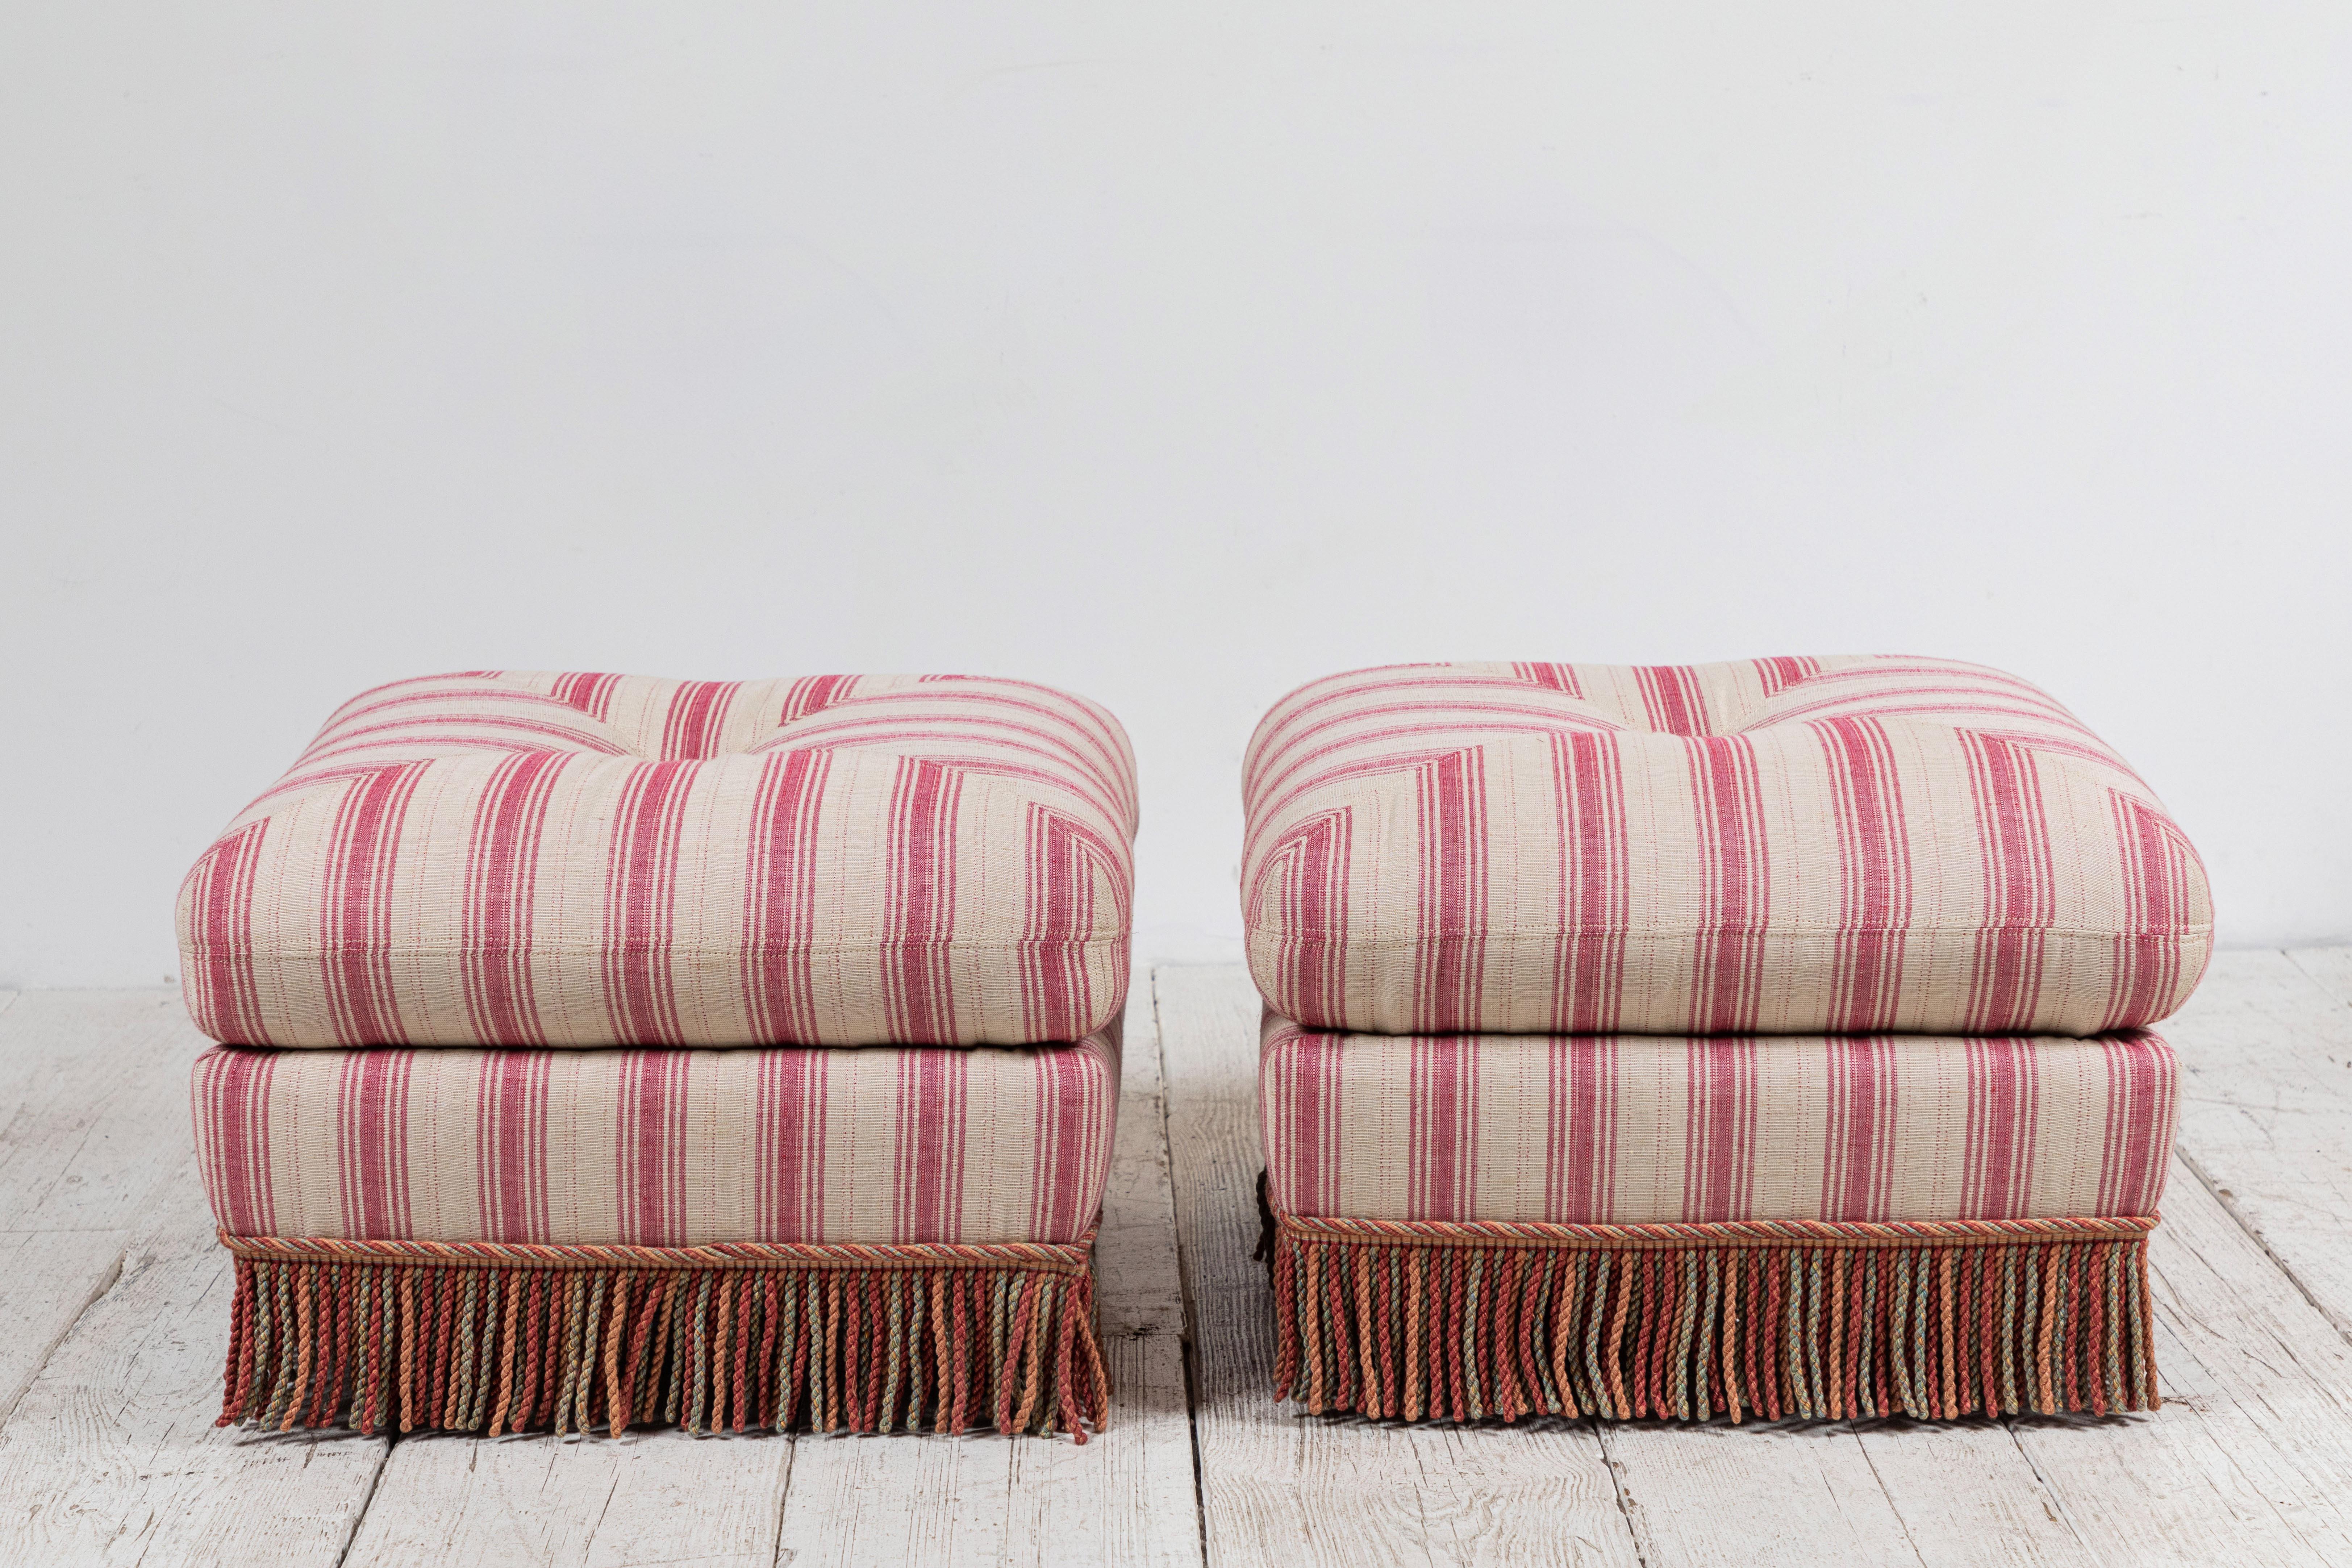 French pillow ottomans newly upholstered in Susan Deliss pink and natural striped fabric, bottom fringe is original.